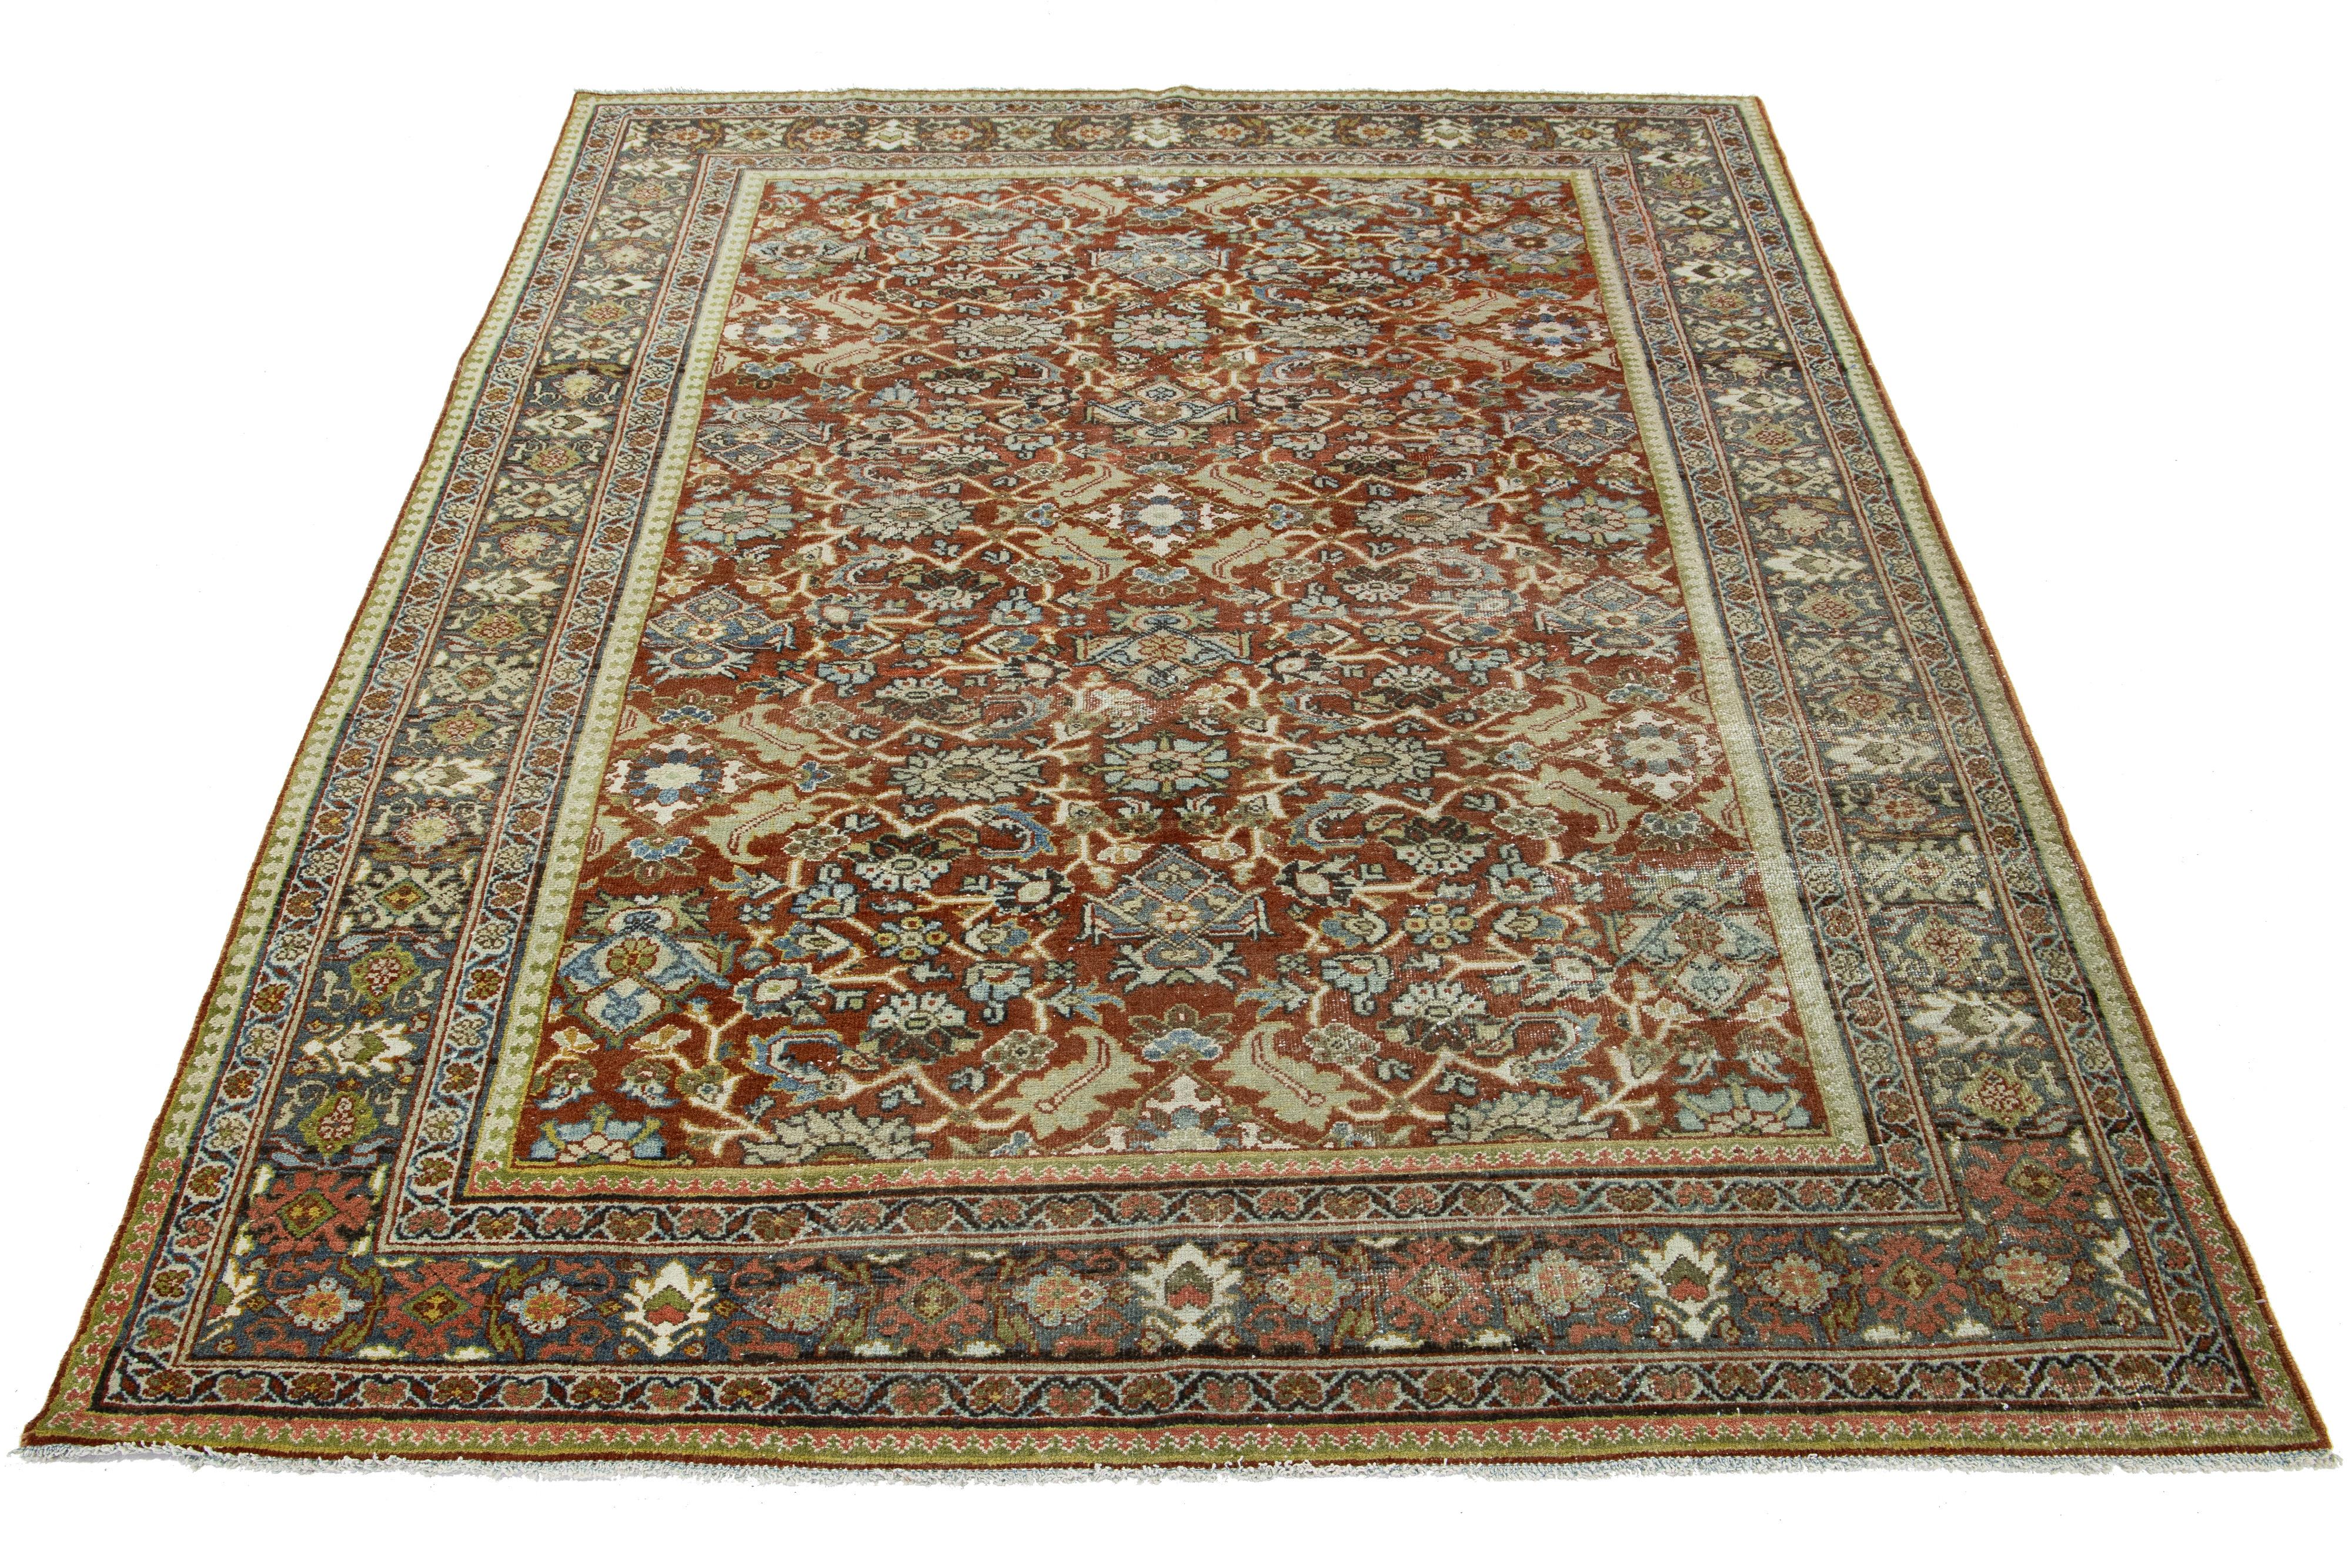 Beautiful Antique Mahal hand-knotted wool rug with a rust field. The floral motif of this Persian rug is adorned with blue, pink, and brown hues.

This rug measures 7'2